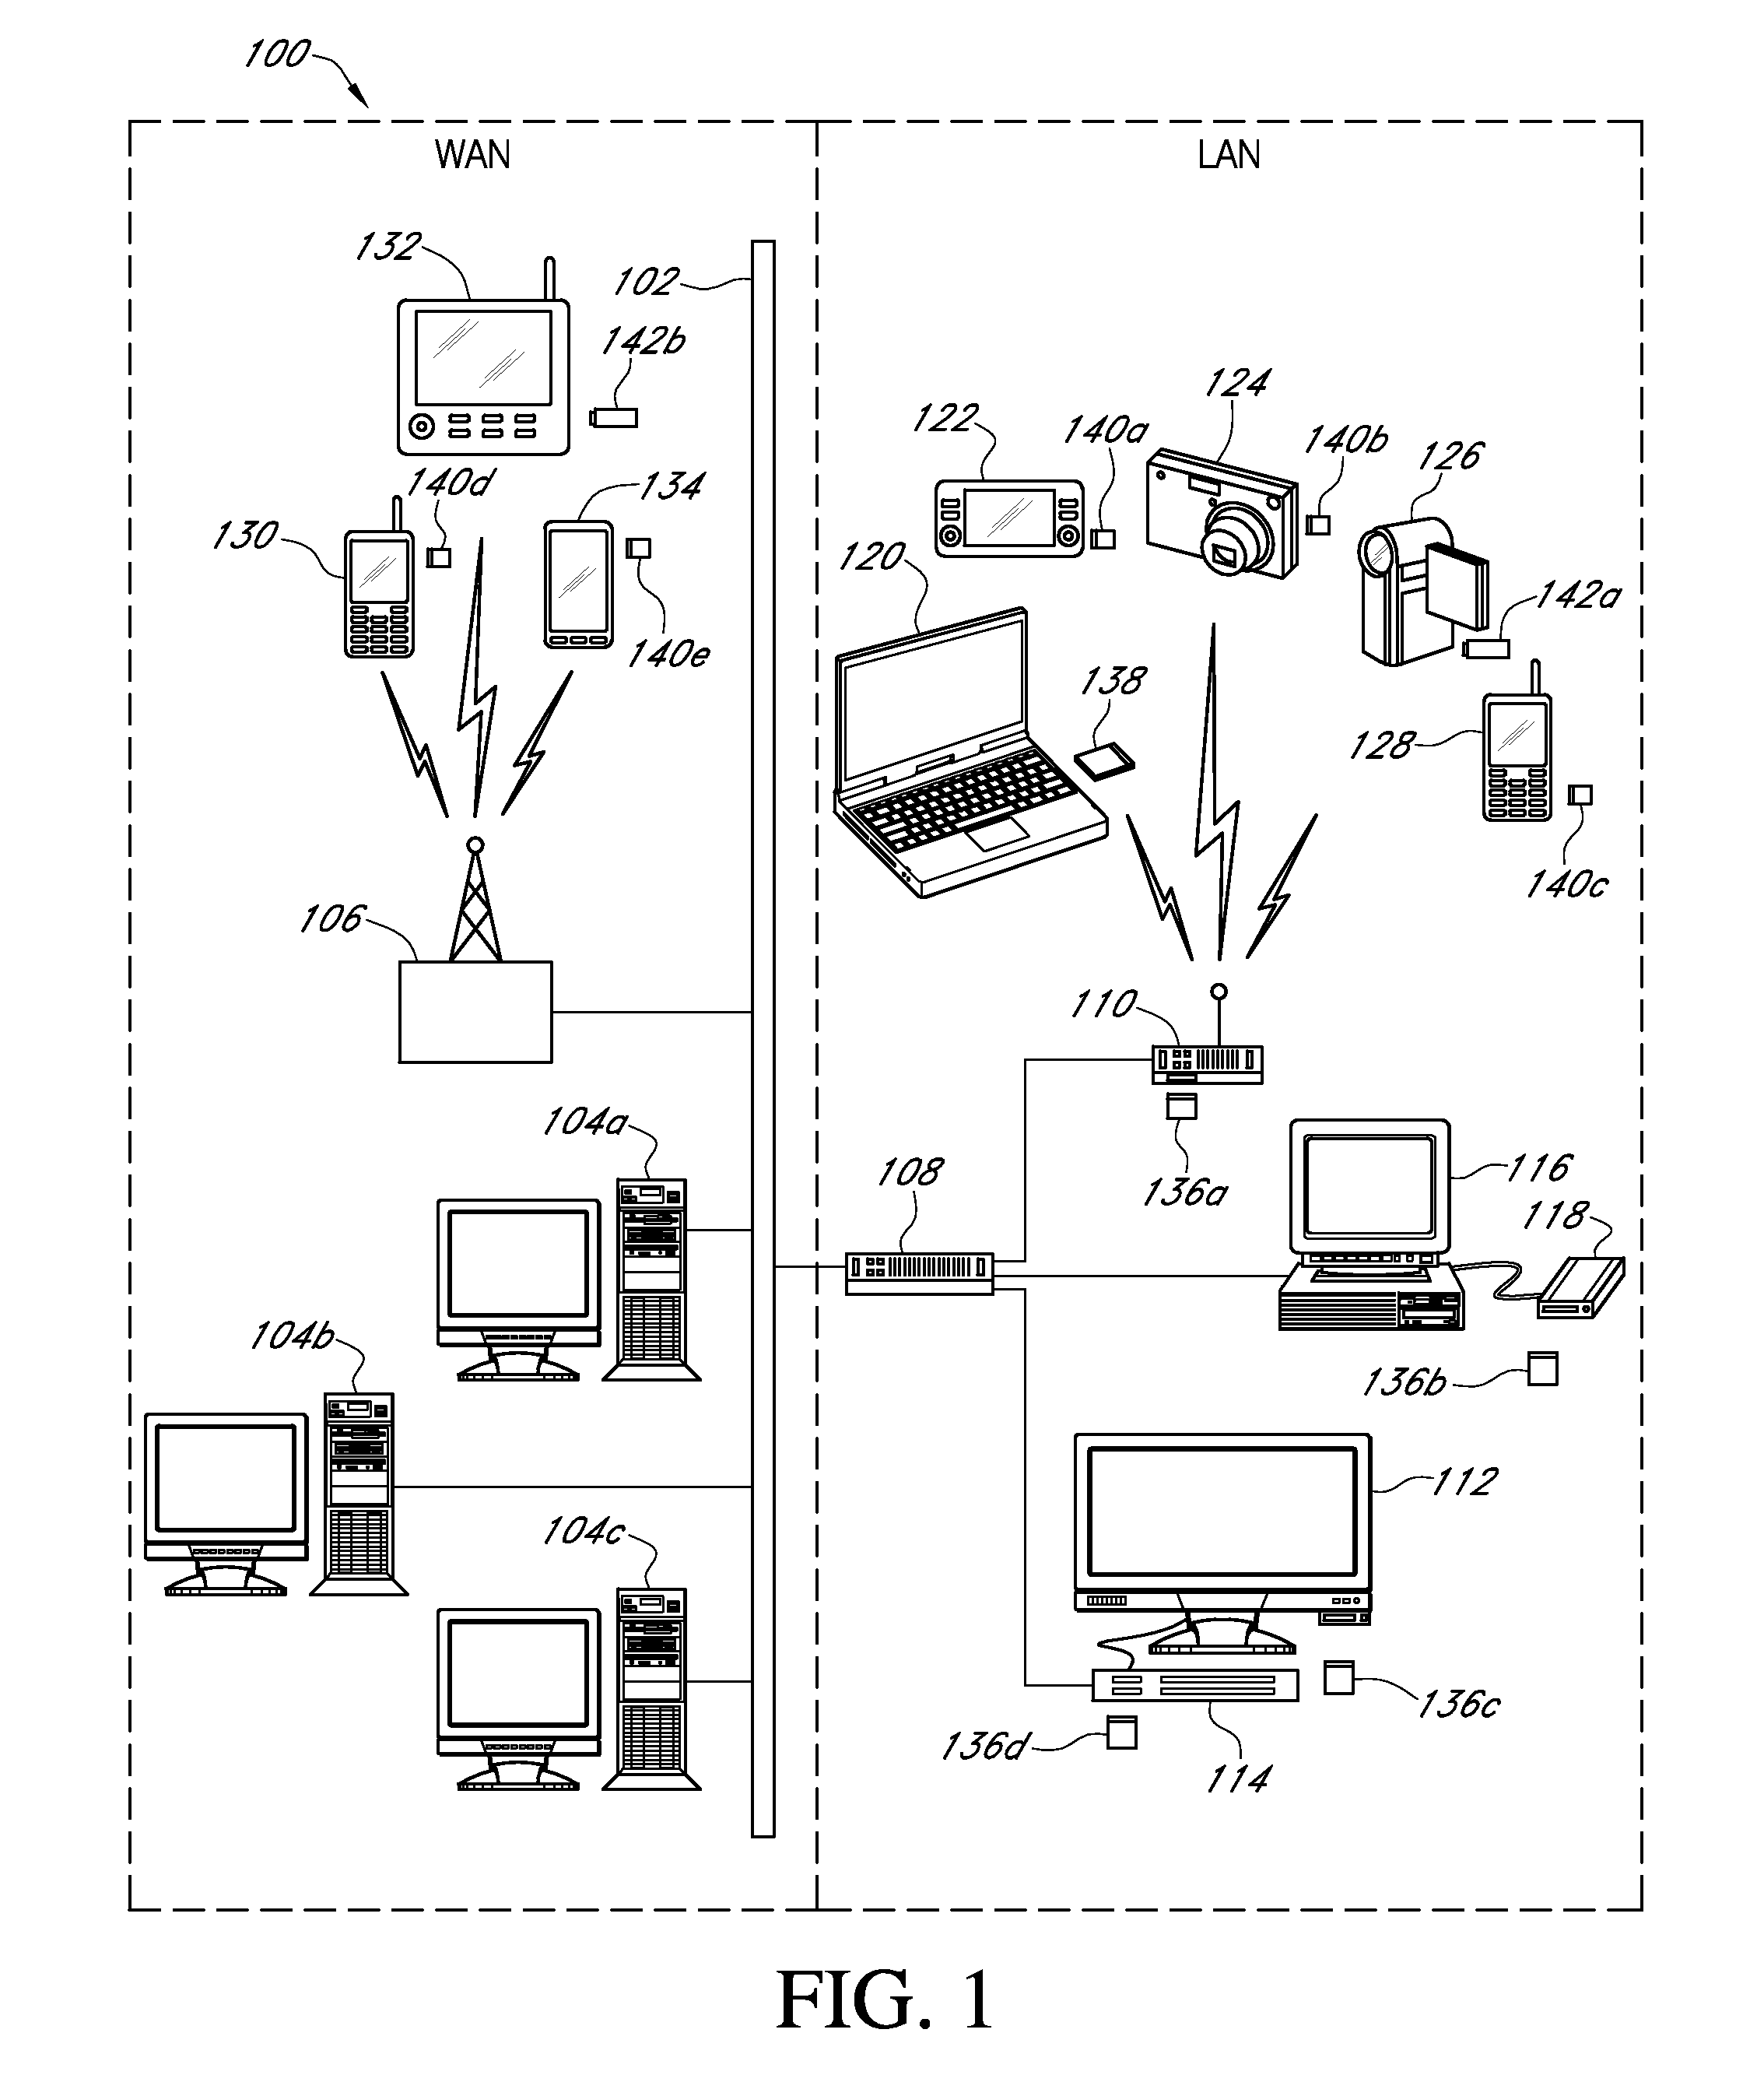 Systems and methods for portable data storage devices that automatically initiate data transfers utilizing host devices